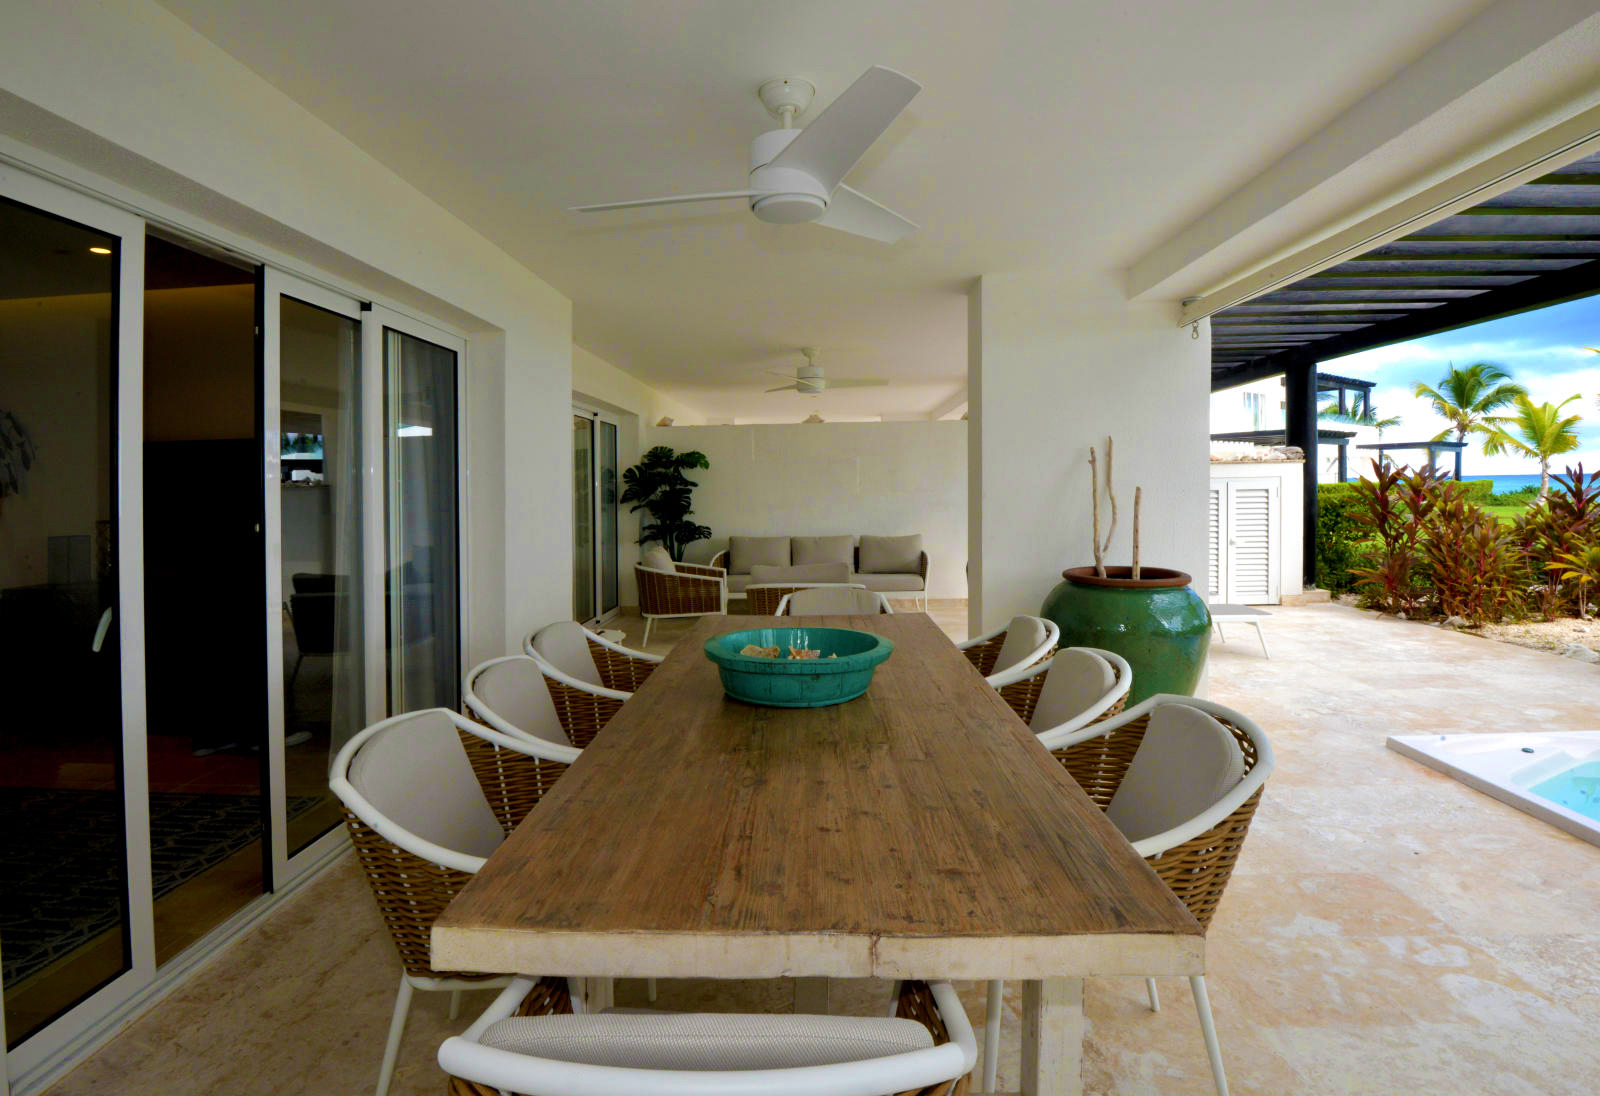 Luxury at Its Finest: Fabulous 2-Bedroom Beach Fro, Cap Cana, DO, 2 Bedrooms Bedrooms, ,2 BathroomsBathrooms,Residential,For Sale,Luxury at Its Finest: Fabulous 2-Bedroom Beach Fro,1394637